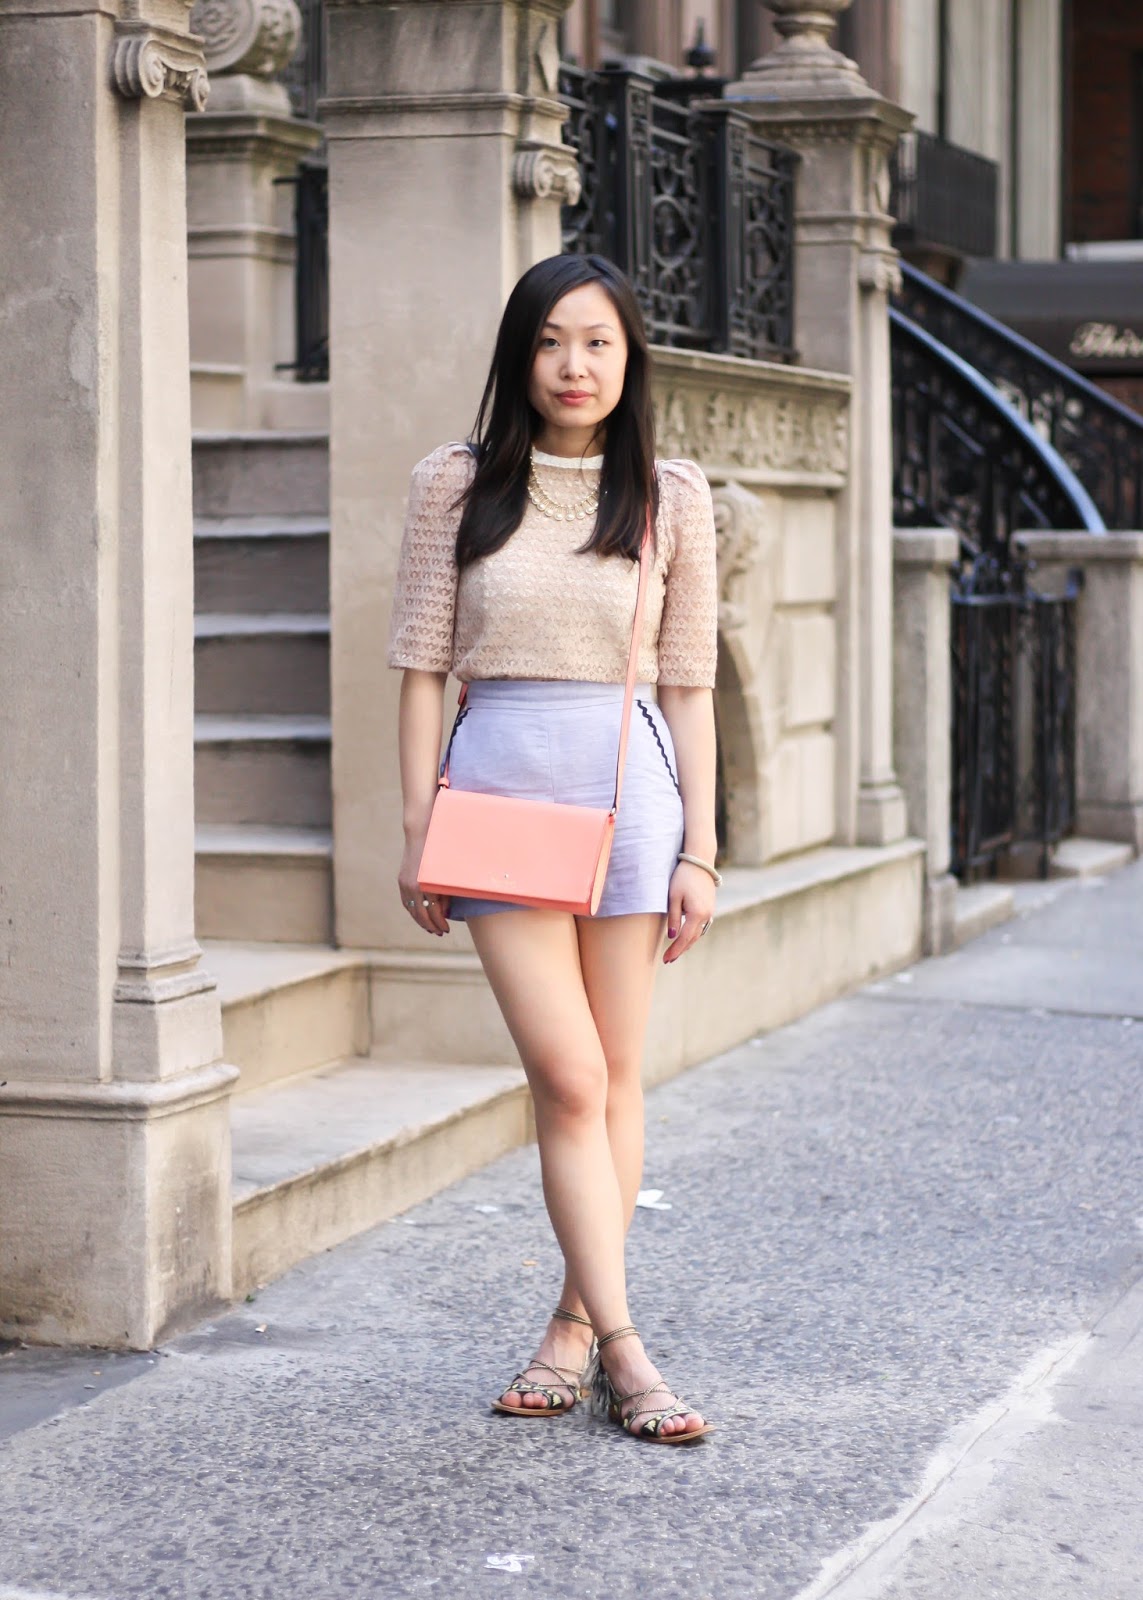 High-Waist Cotton Shorts and Lace Top Outfit, Layers of Chic 